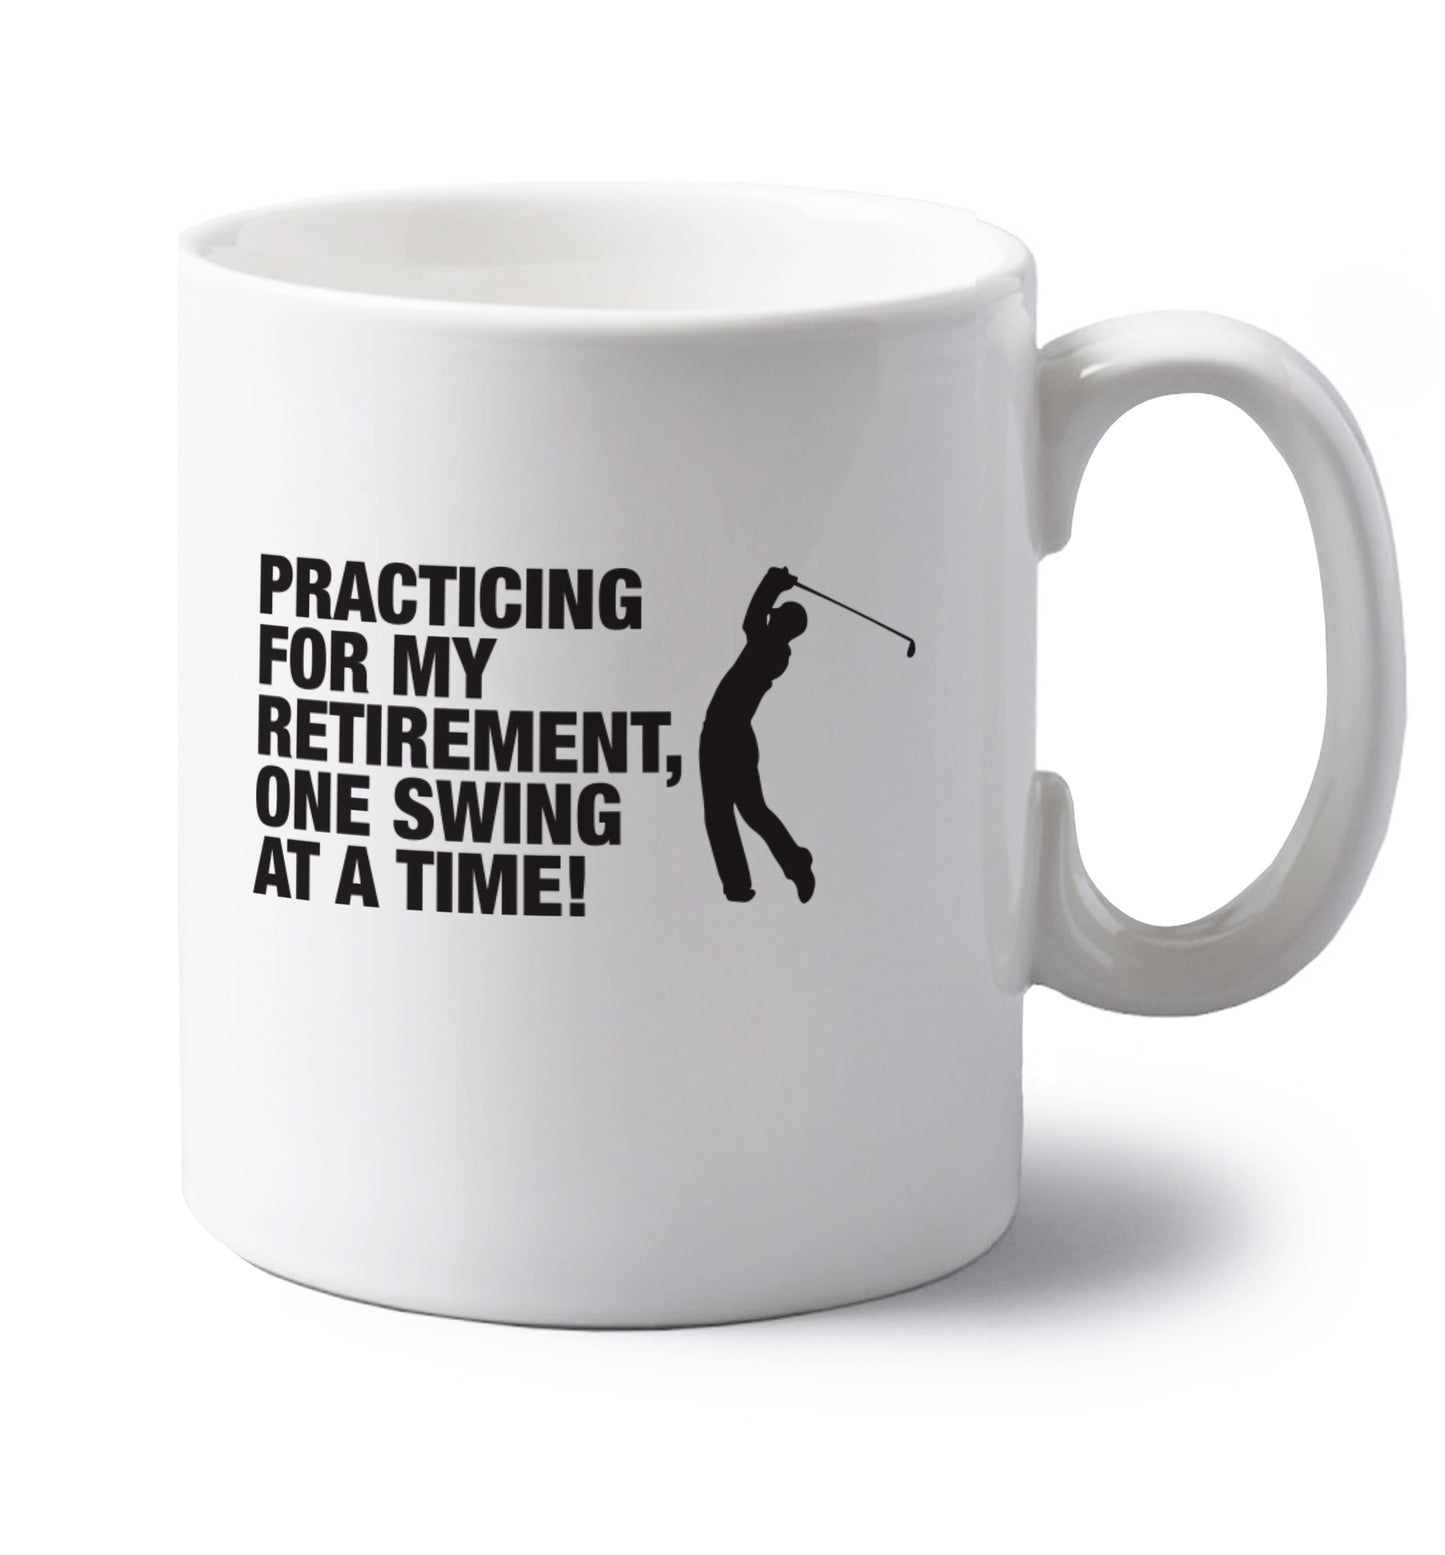 Practicing for my retirement one swing at a time left handed white ceramic mug 